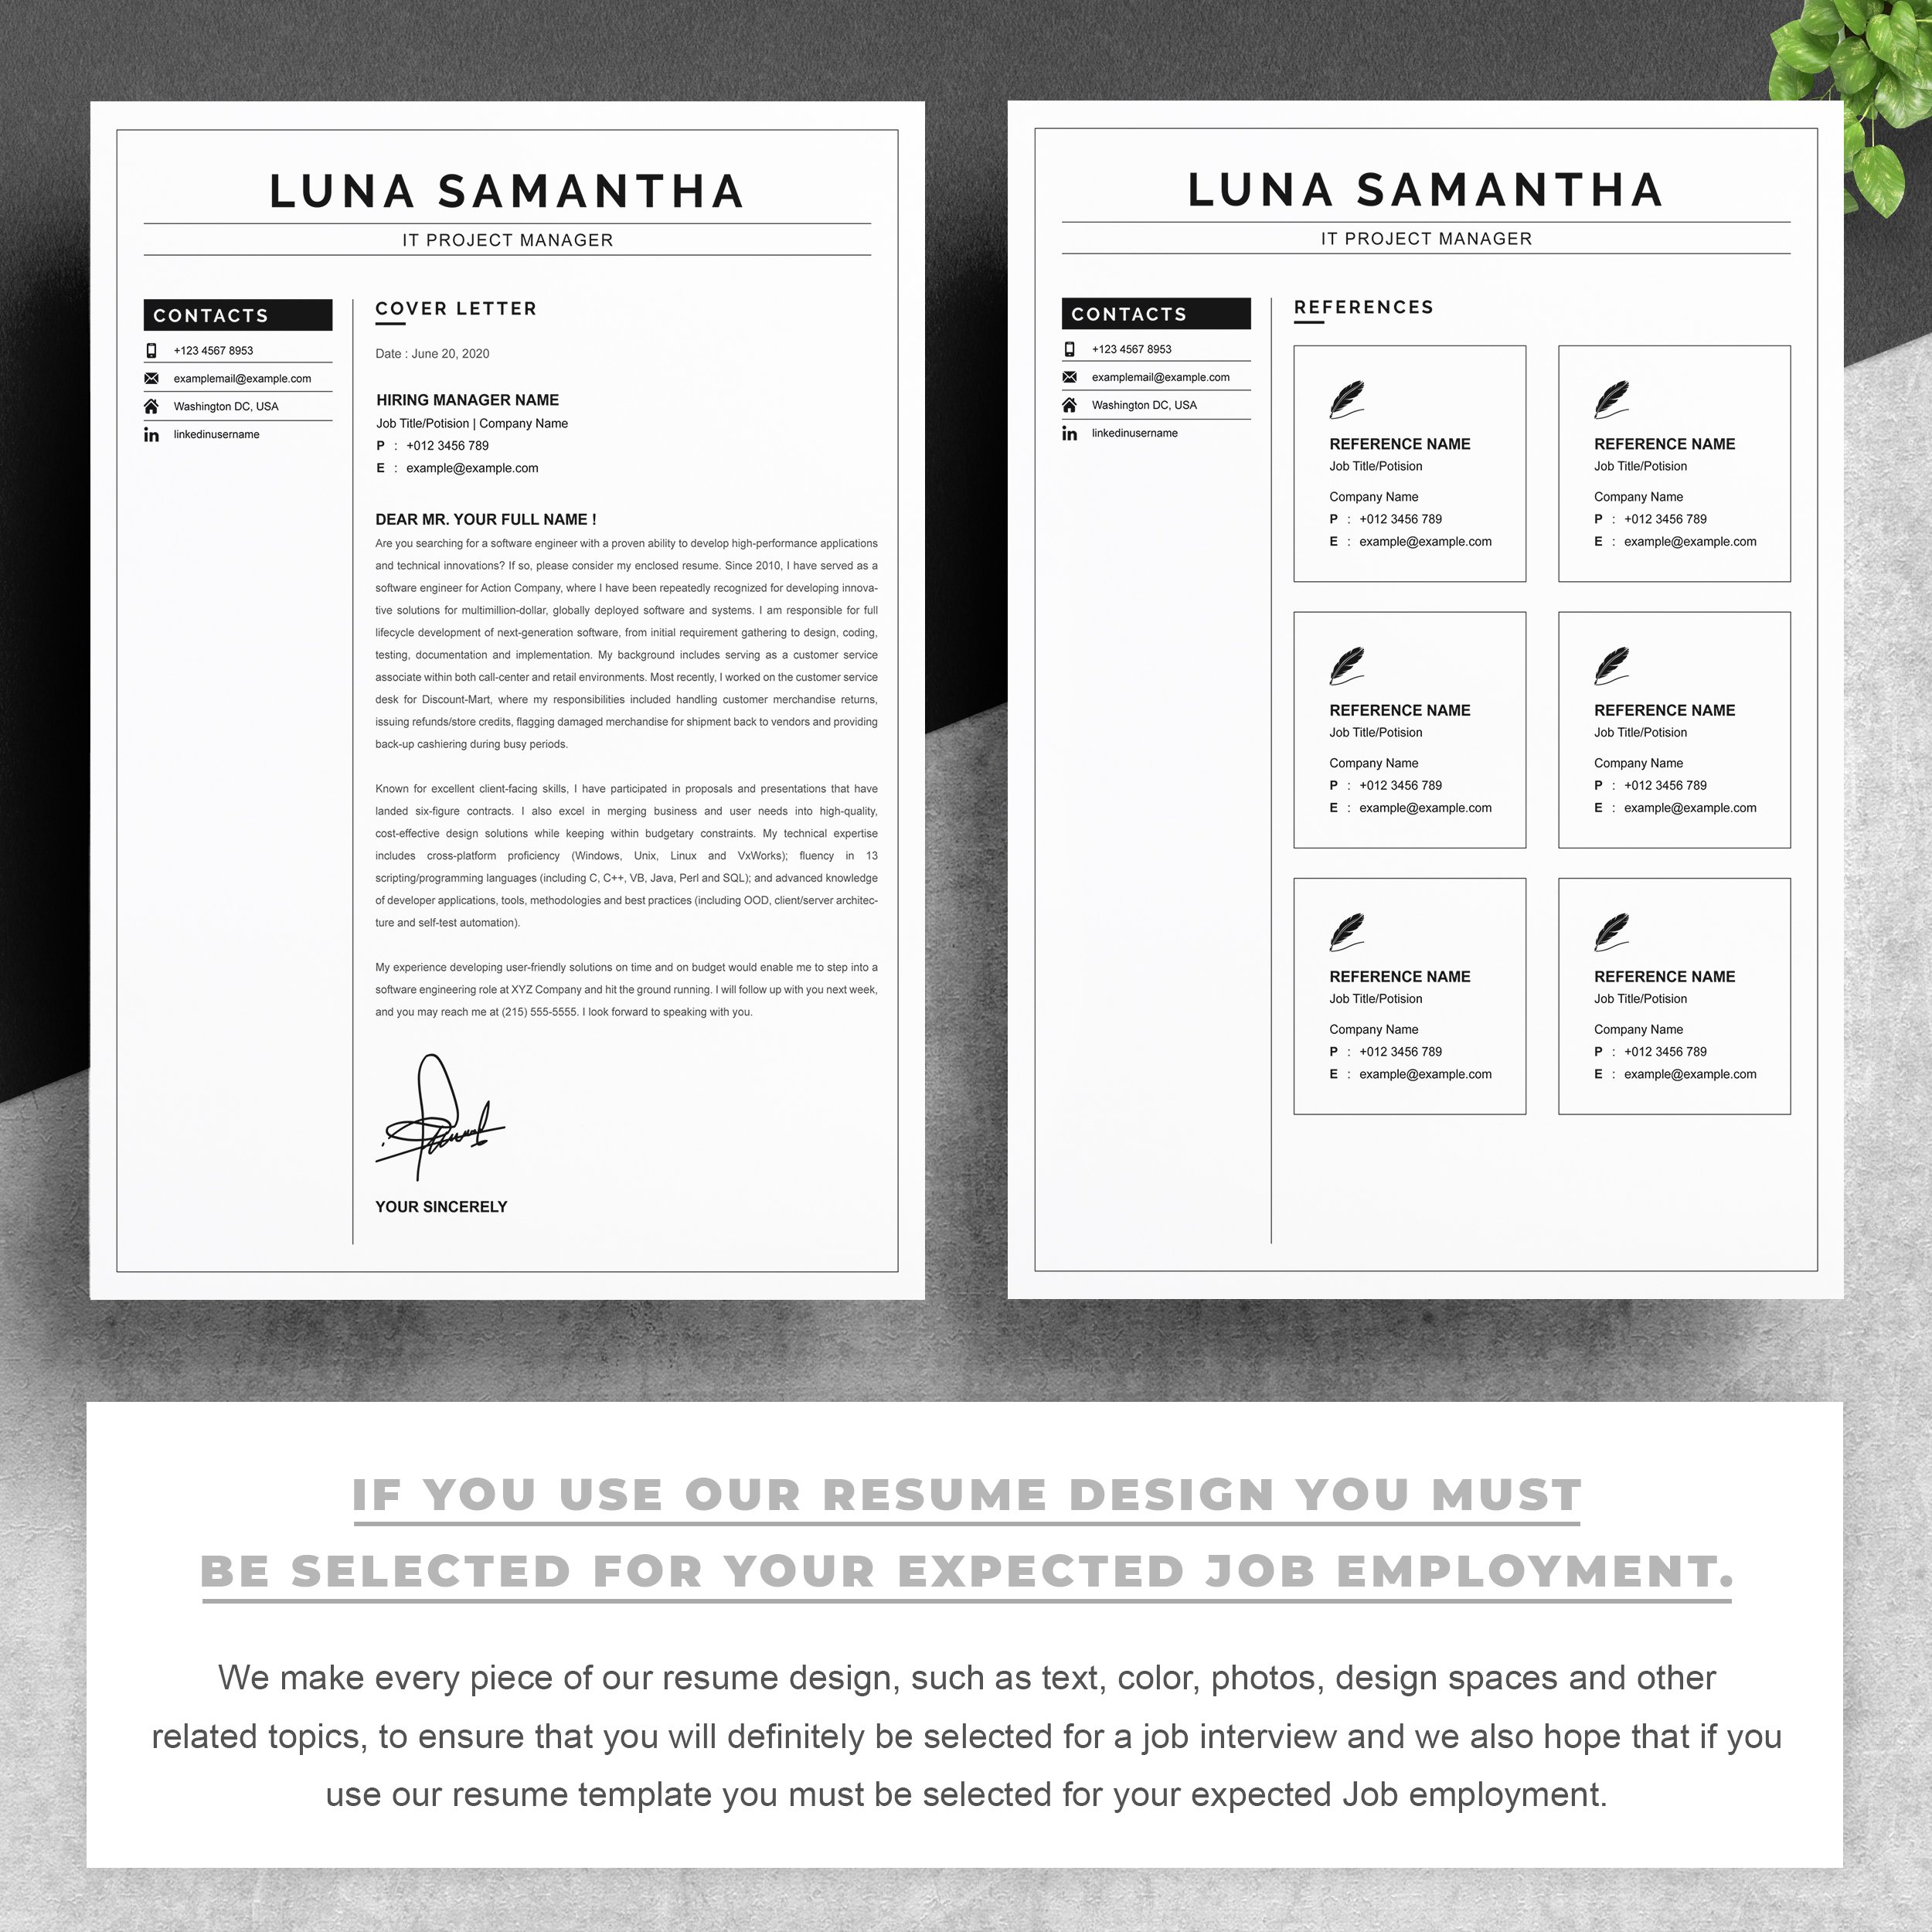 03 2 pages free resume design template copy 816